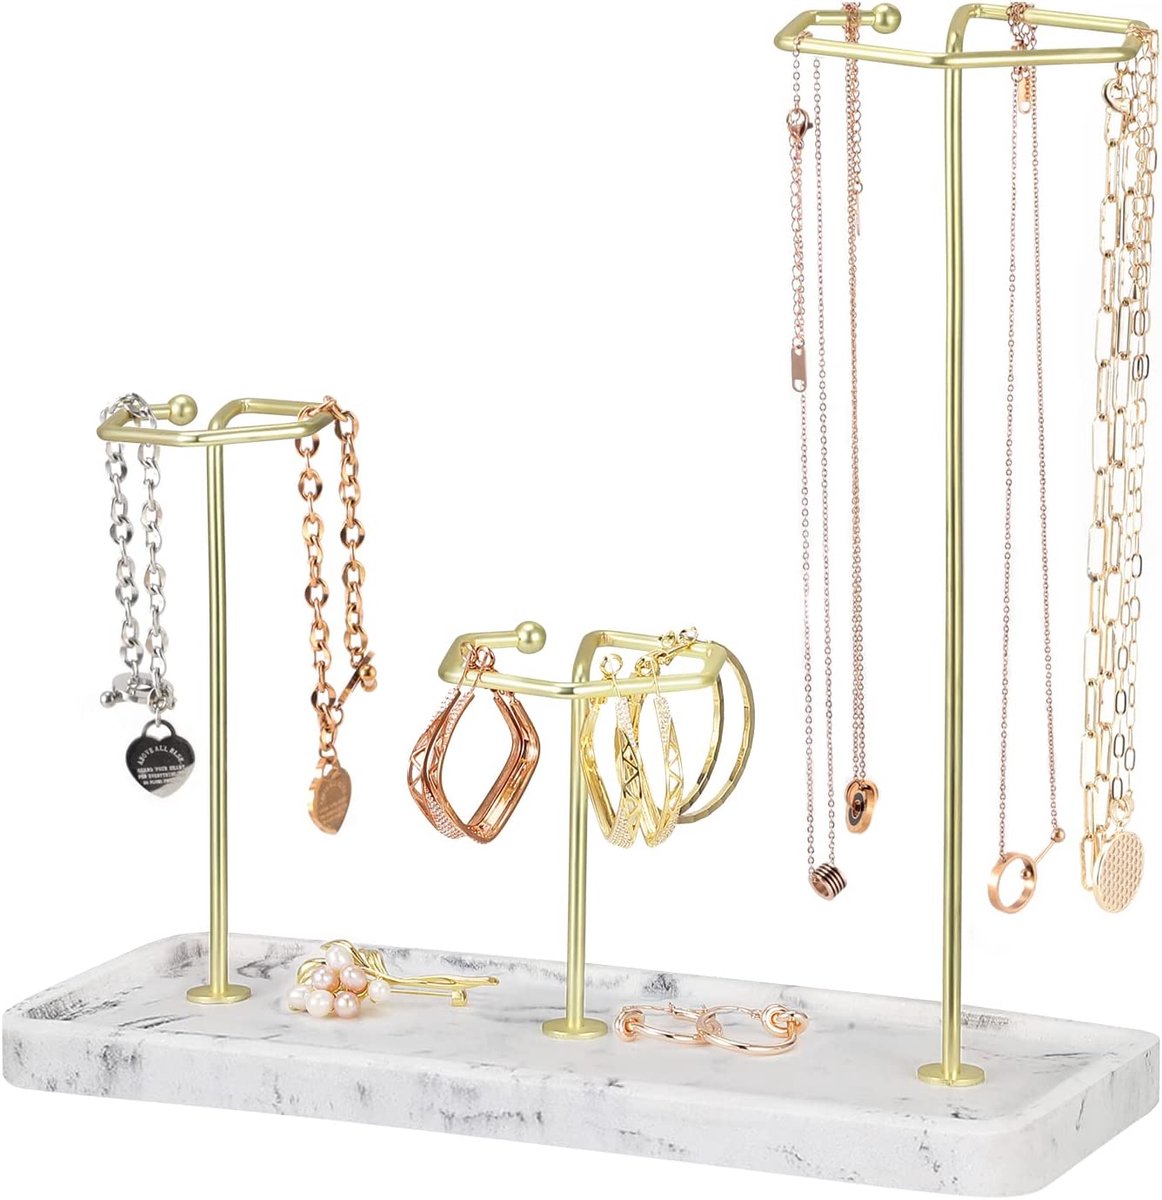 Jewelry Organizer Stand, Irregular Height Jewelry Holder Stand with Rectangular Resin Tray Golden Metal Rack, Necklace Bracelets Rings Earrings Display Tower Jewelry Tree Stand, Marble White